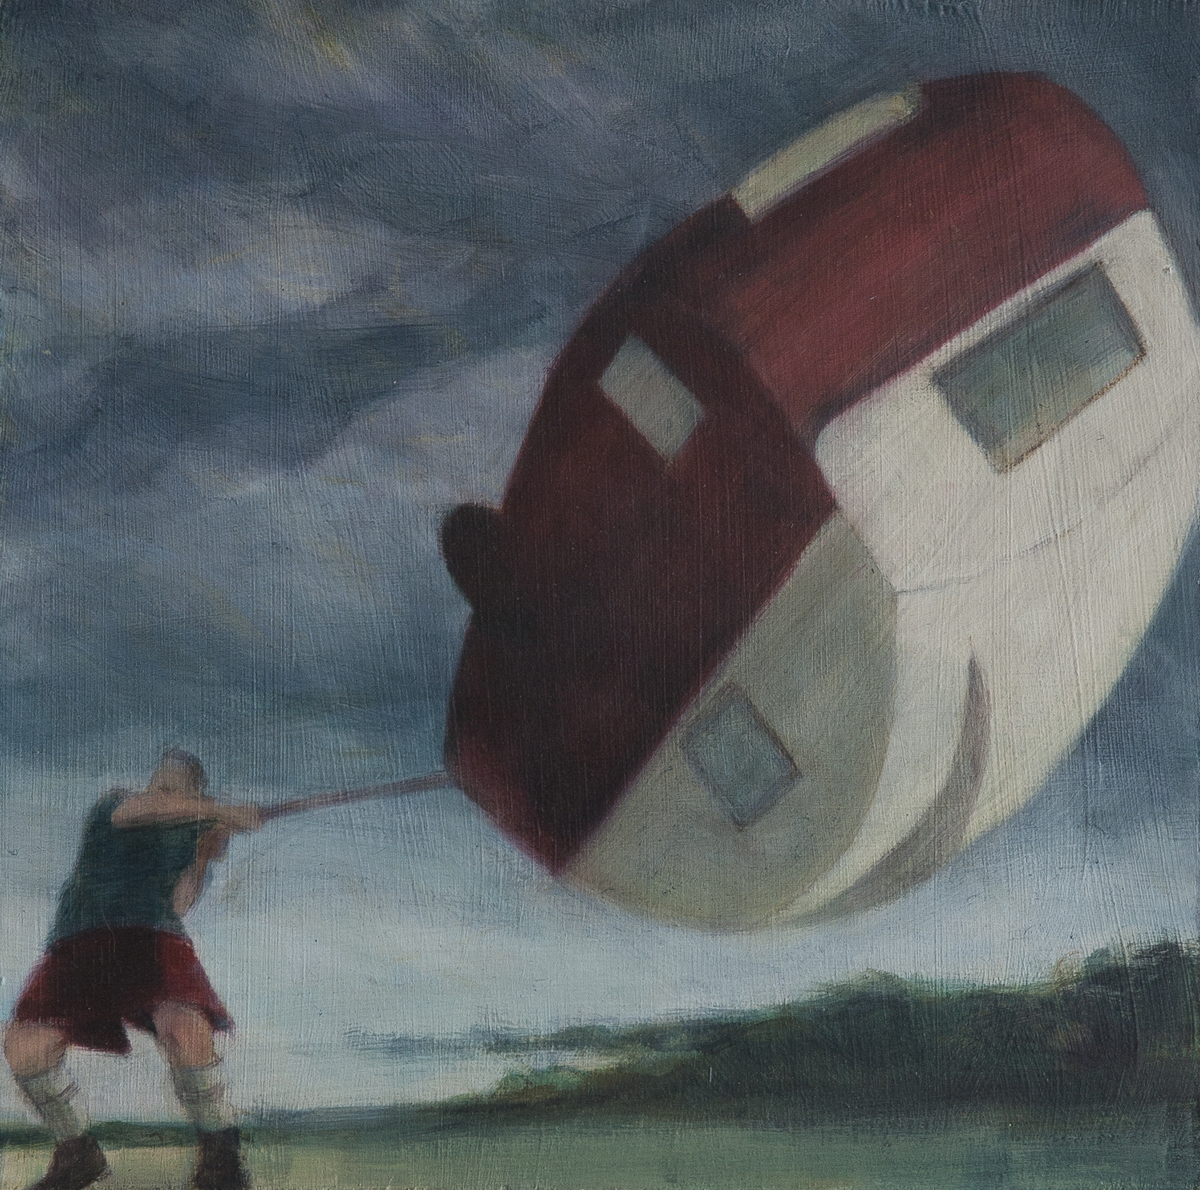 Summer Holiday (2014), Oil on Board, 20.5 x 20.5cm